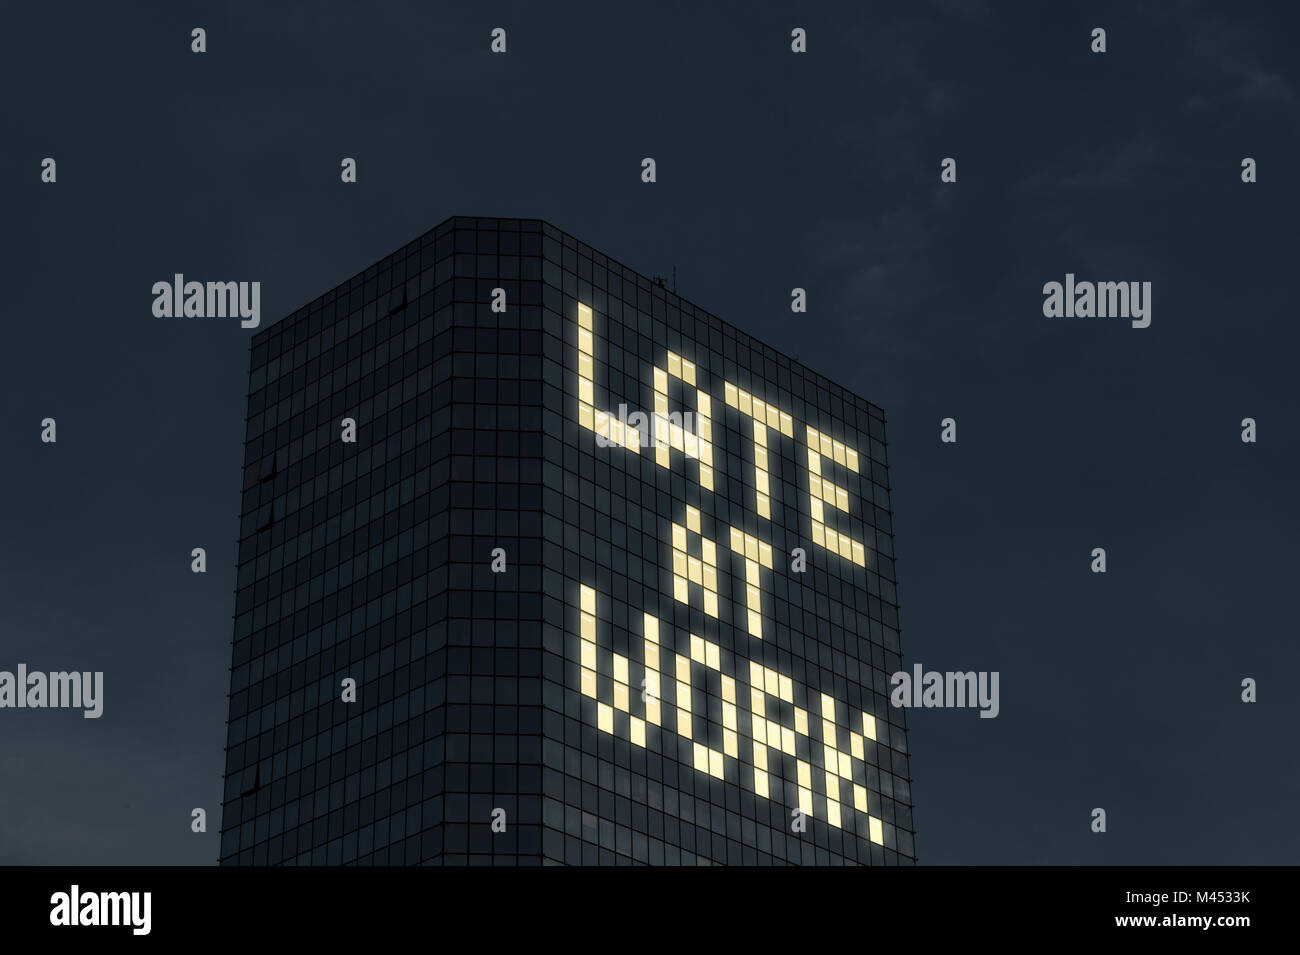 Late at work concept. Working overtime and extra hours. Tired, stressed from too much things to do at job. Text made by office building window light. Stock Photo